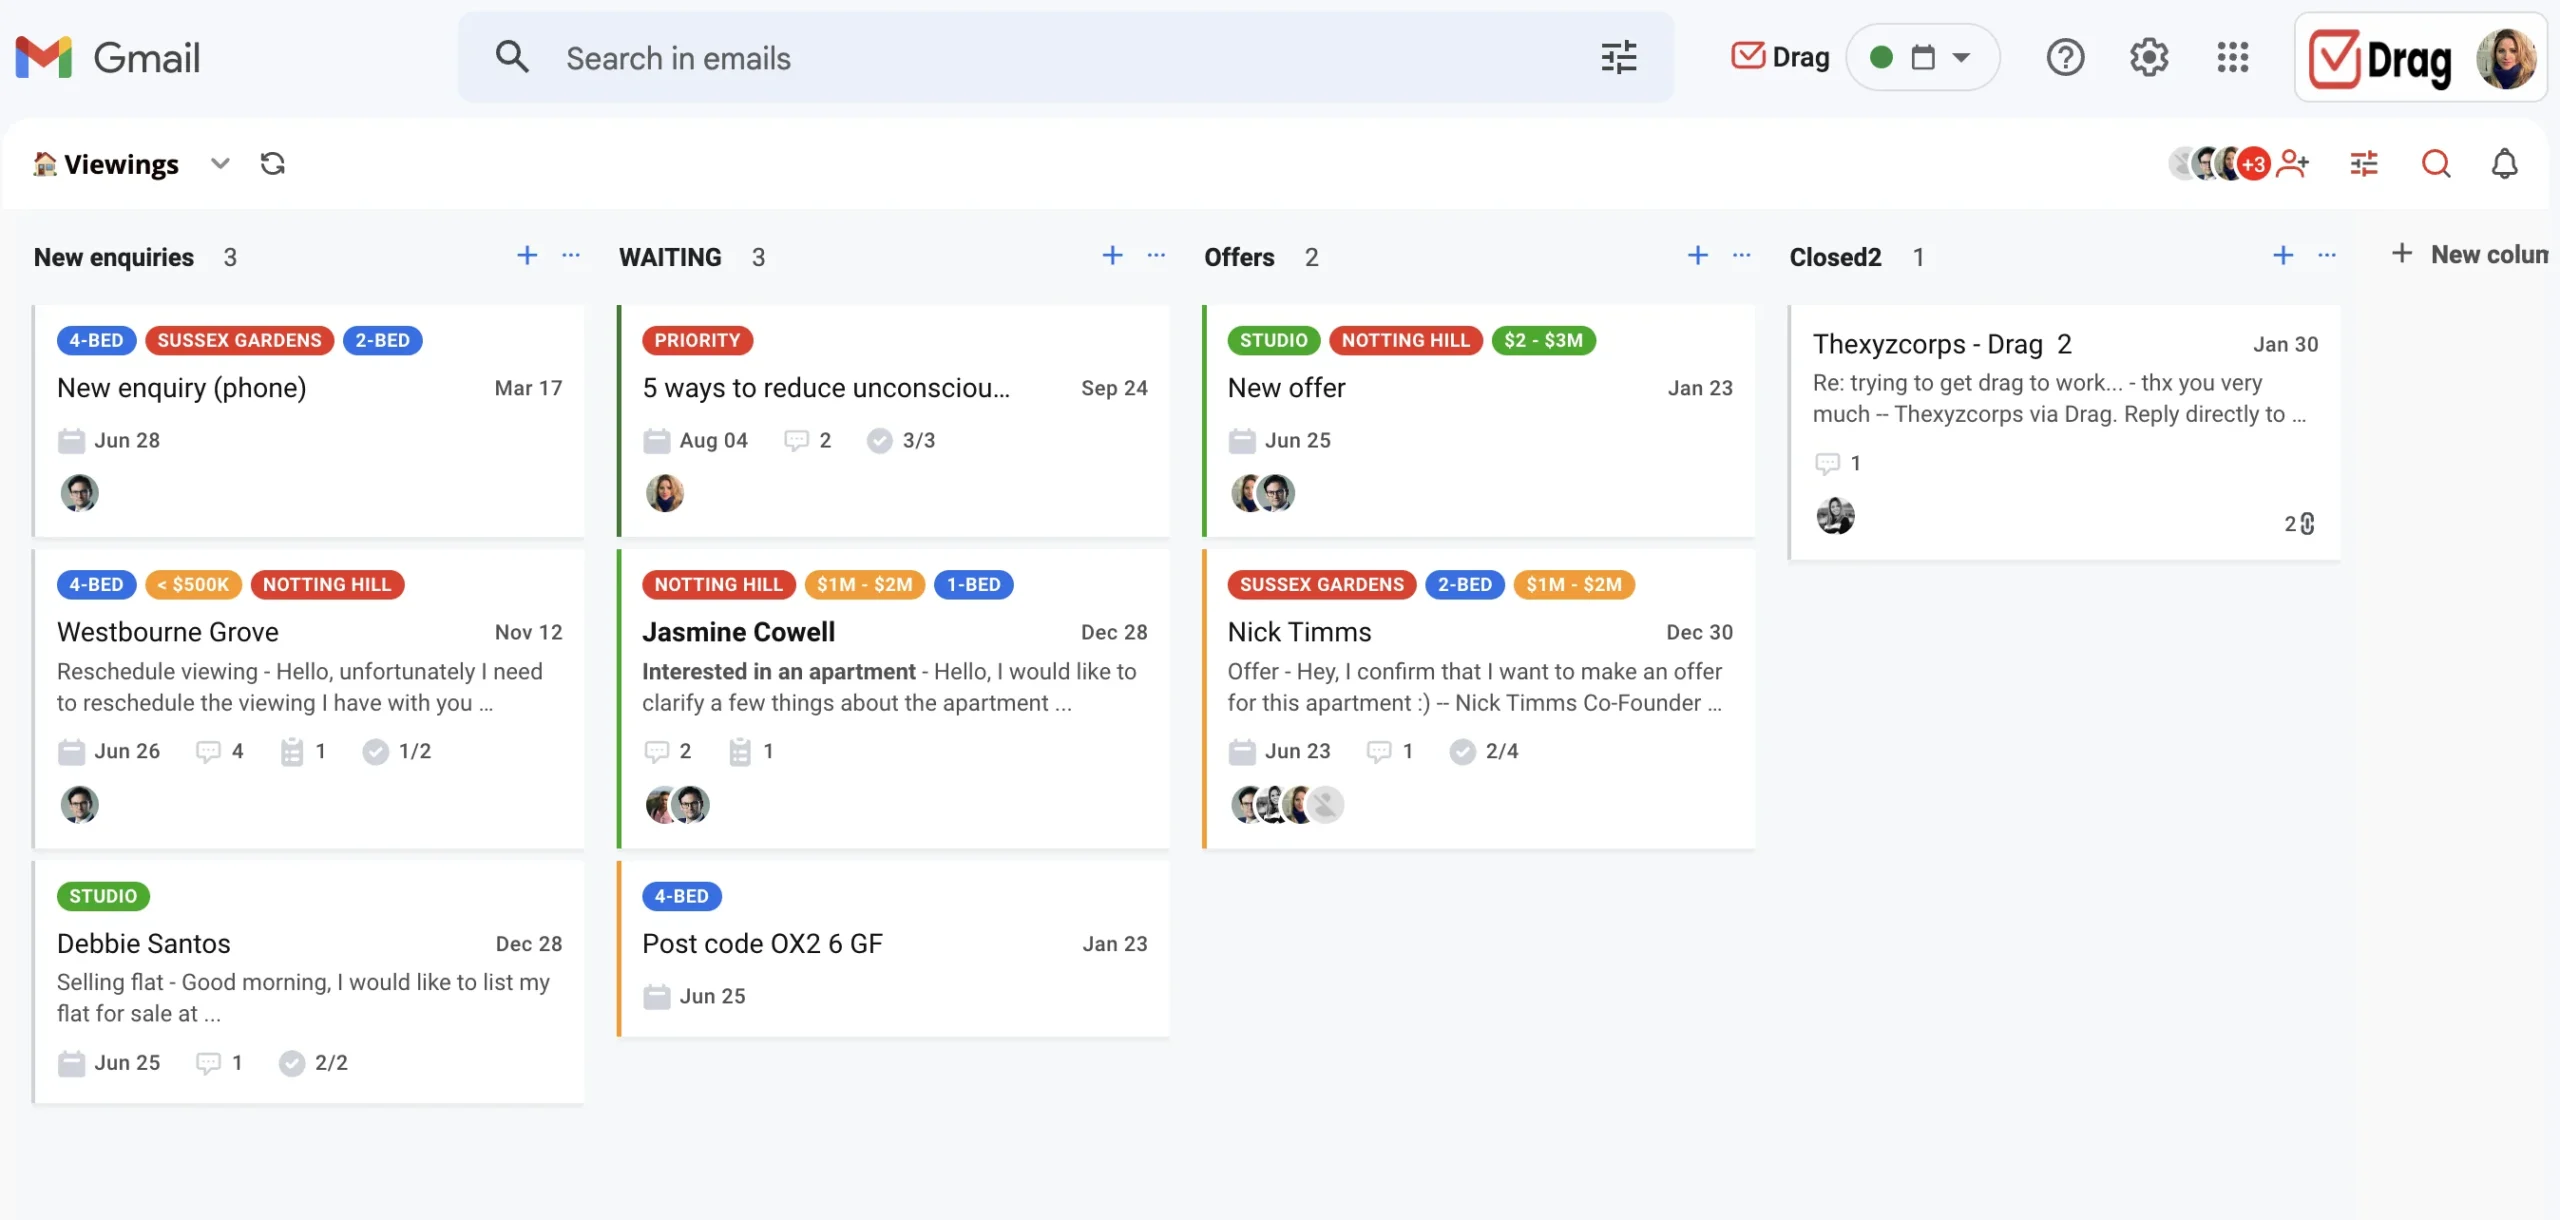 Google Groups Calendar: Everything you need to know DragApp